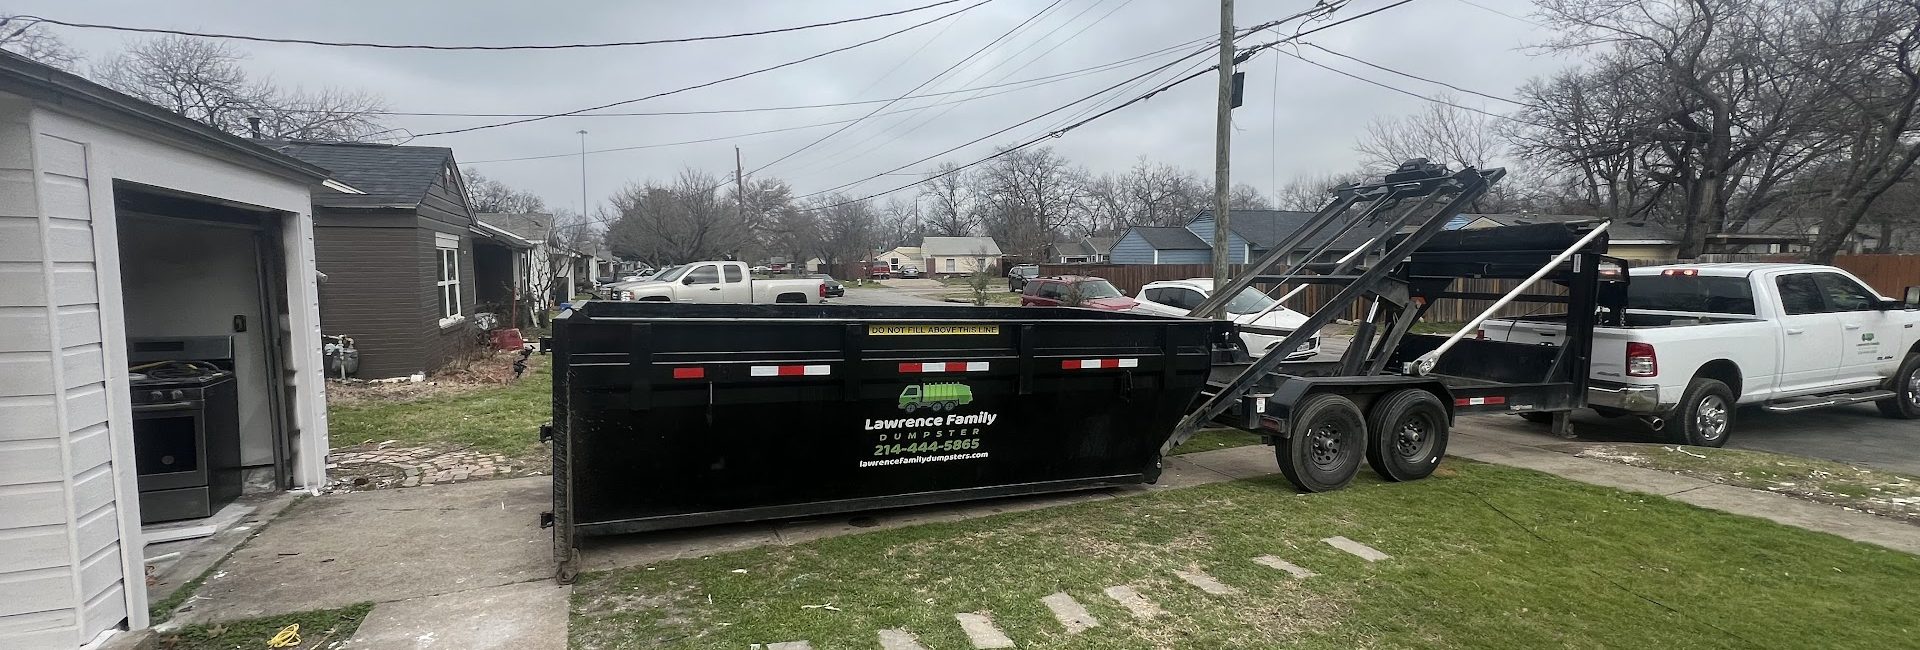 Lawrence Family Dumpster Rentals and Junk Removal Services 6